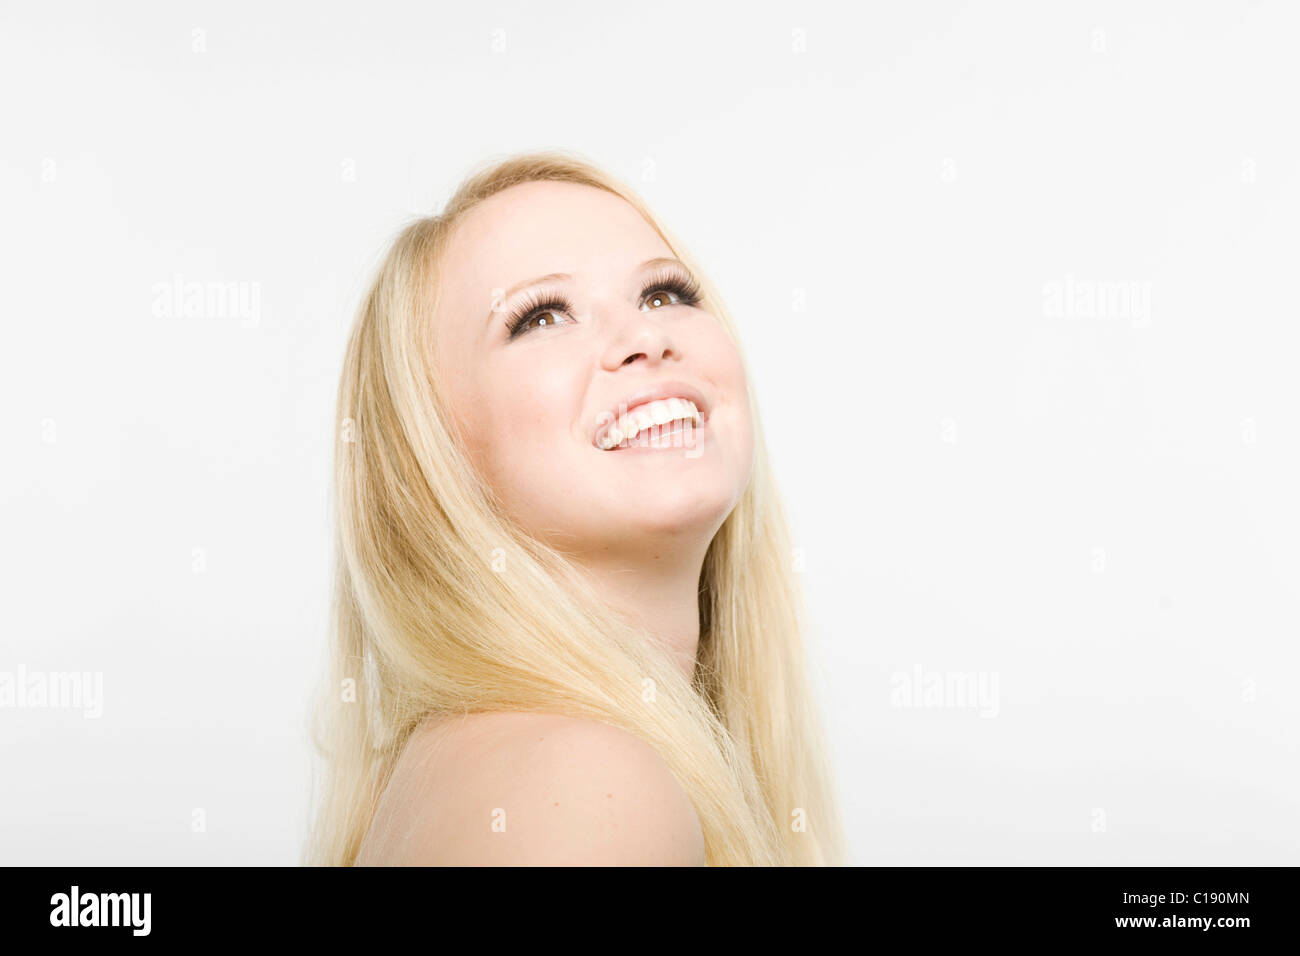 Young blonde woman looking up, smiling Stock Photo